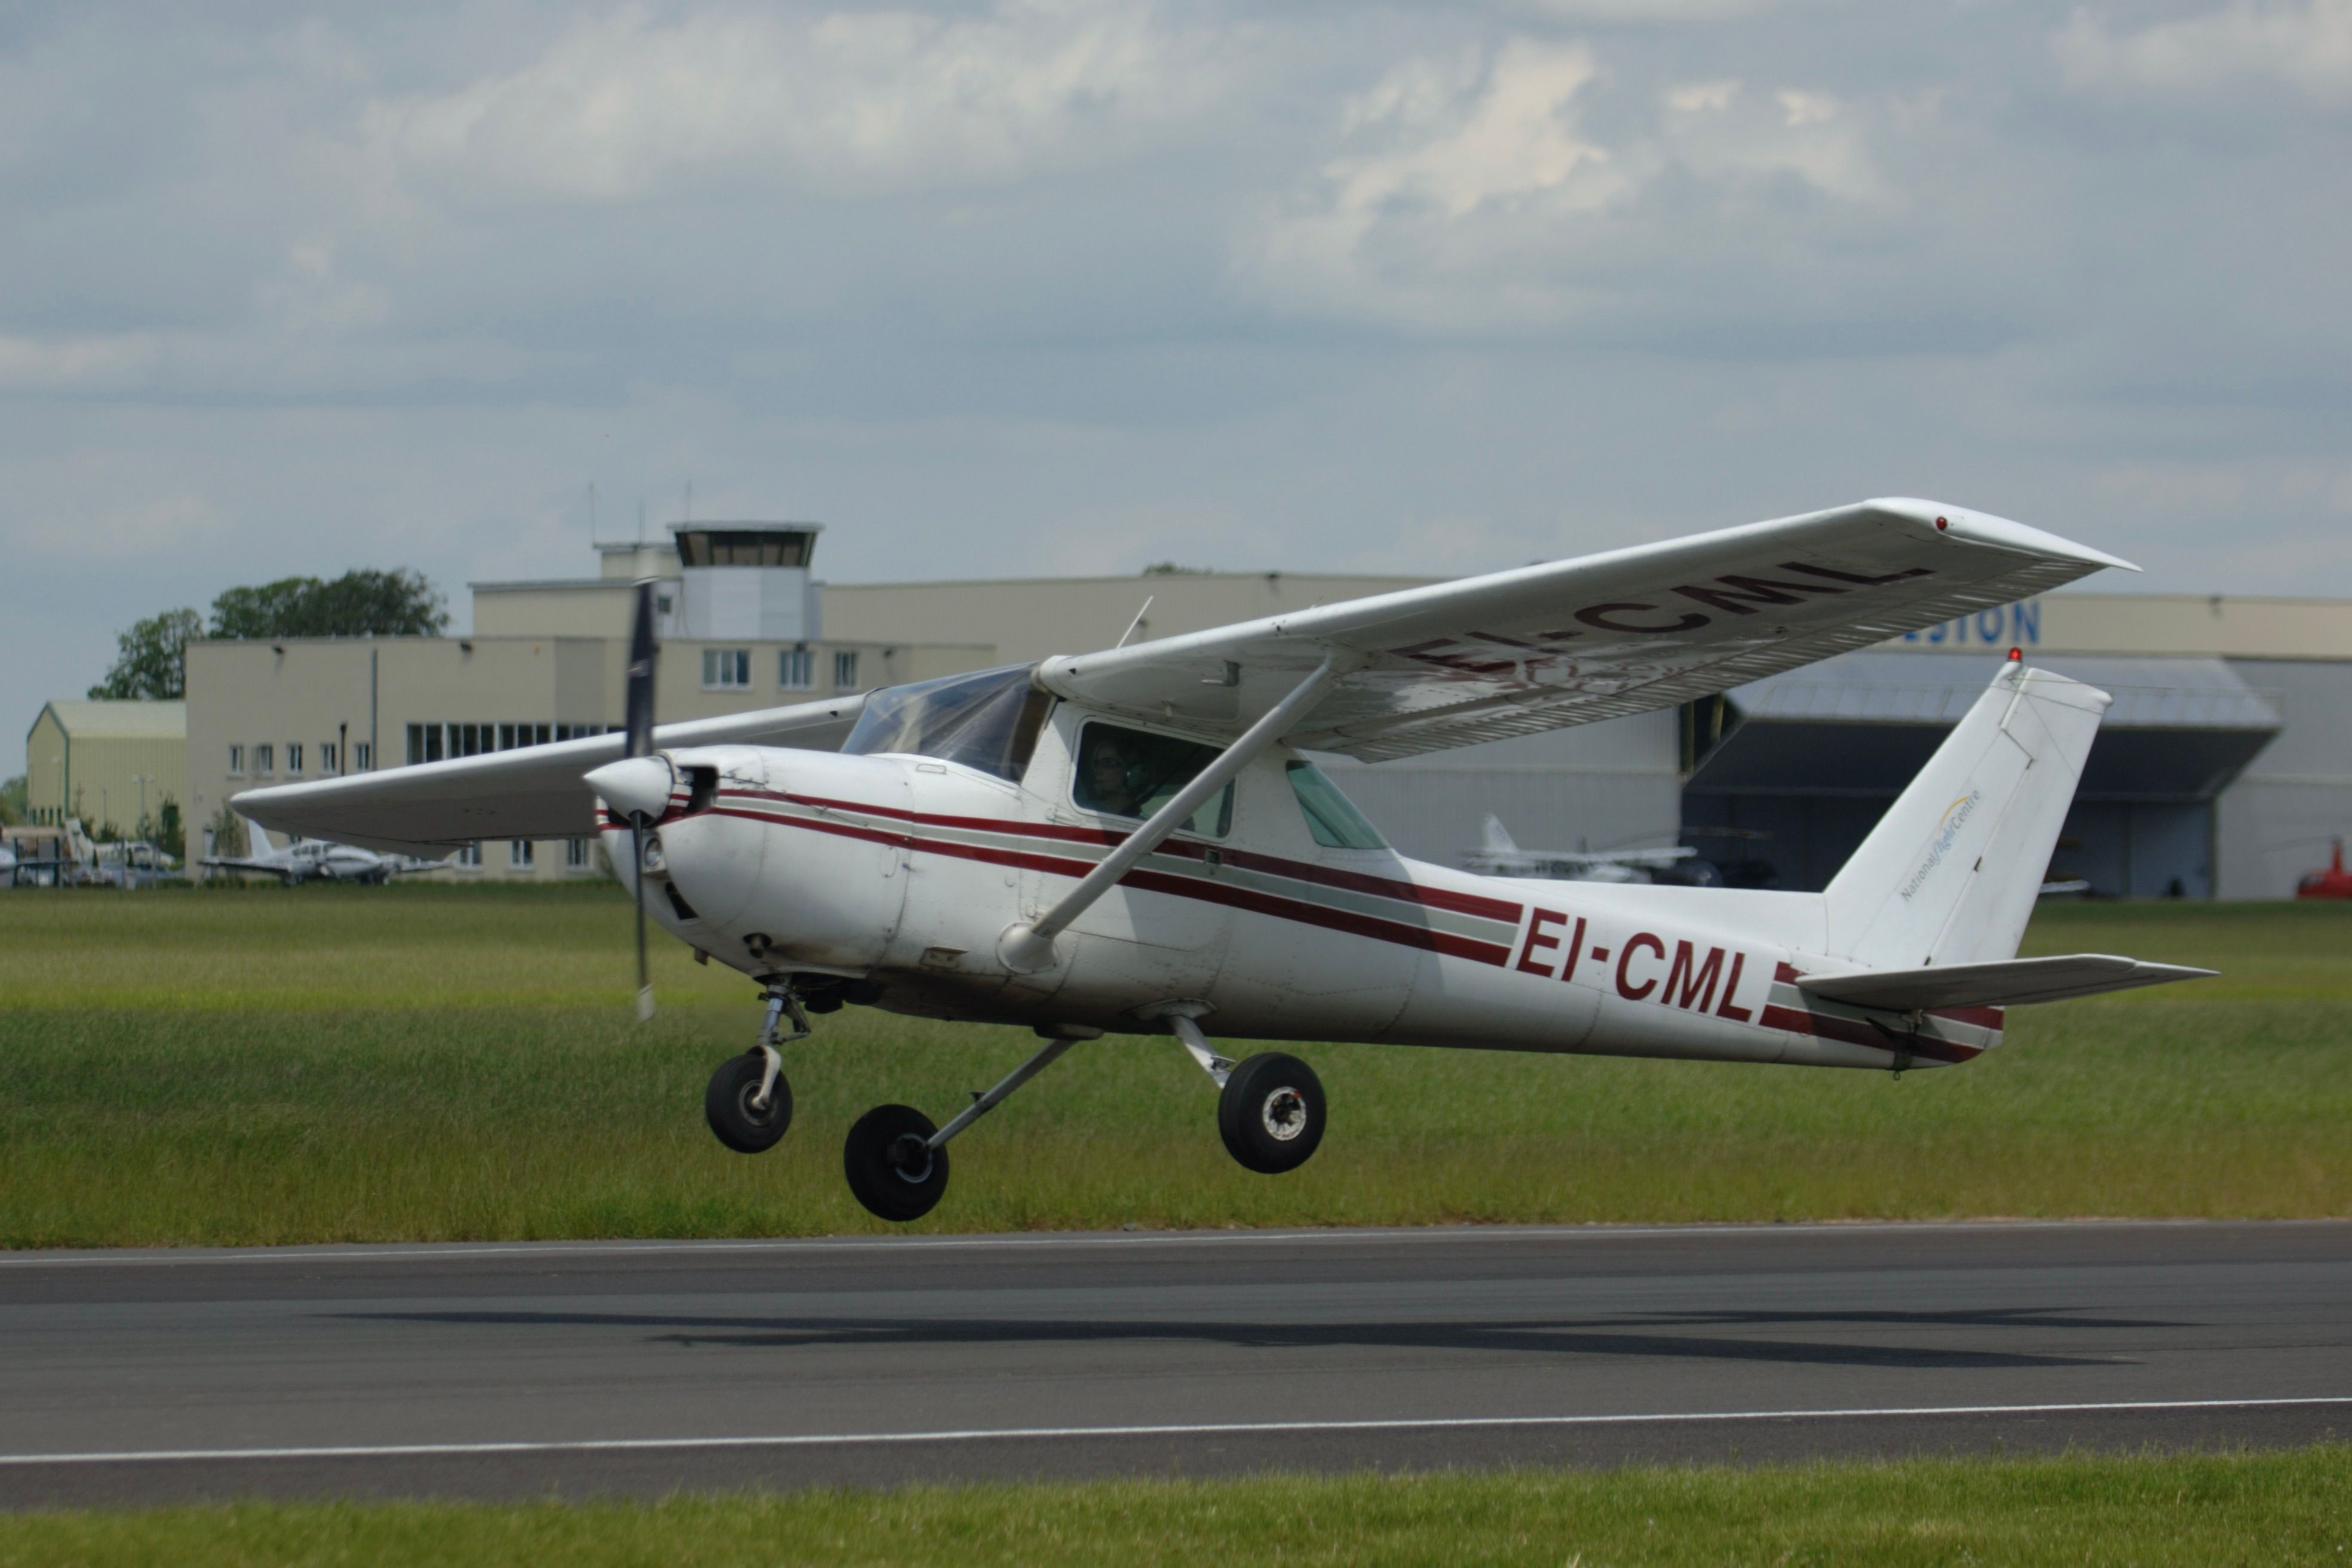 A Cessna 152 about to land.